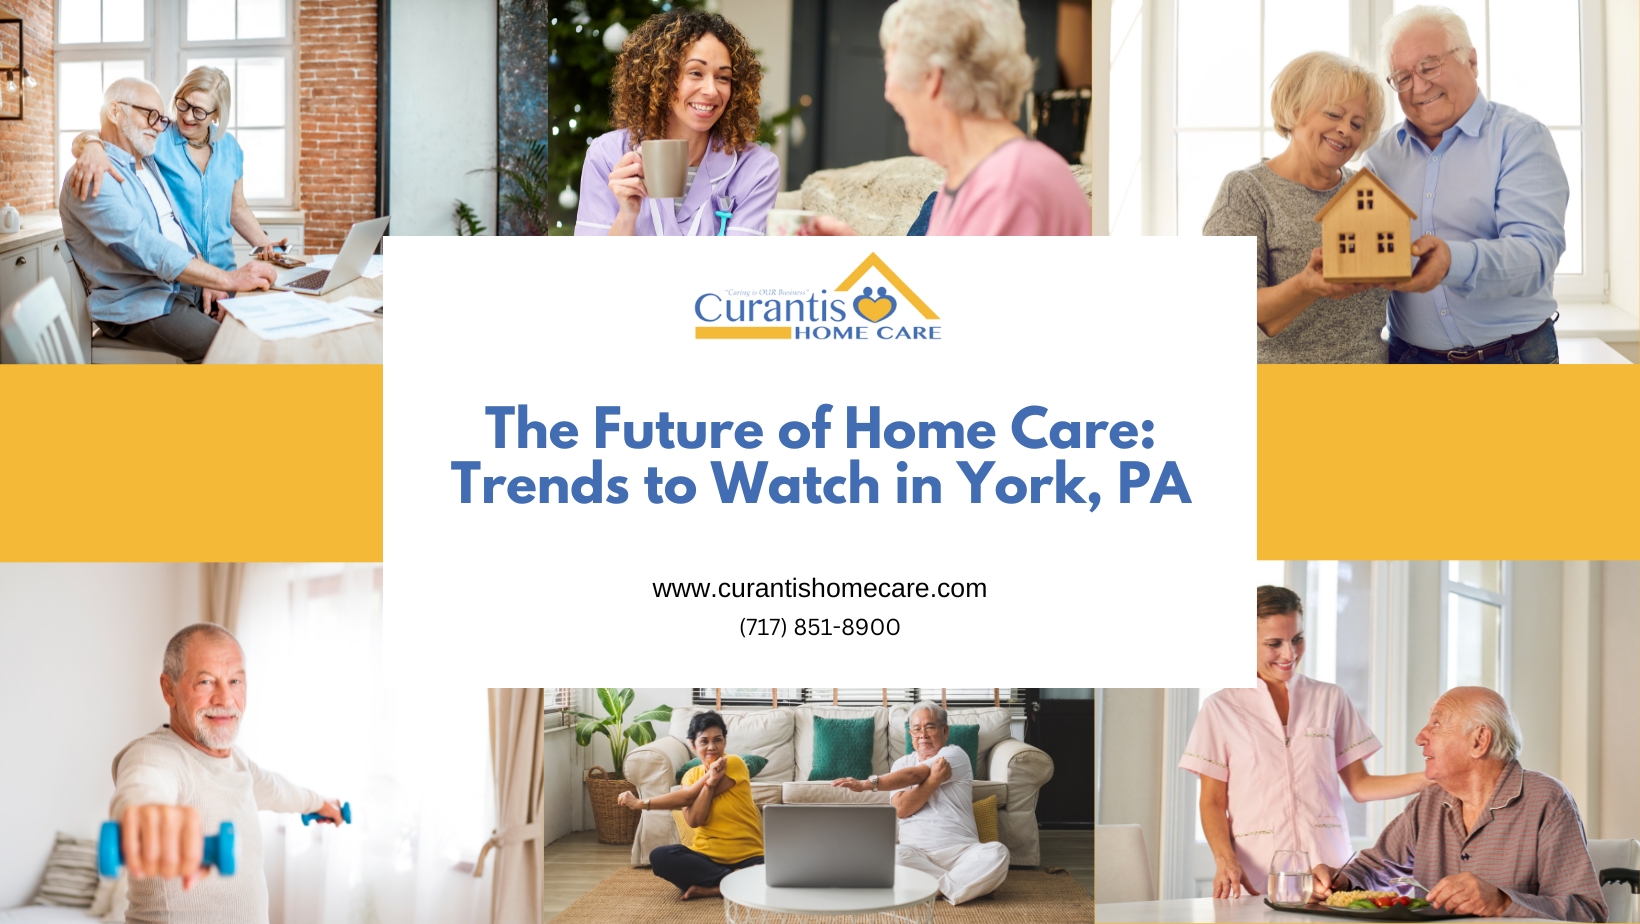 The Future of Home Care- Trends to Watch in York, PA